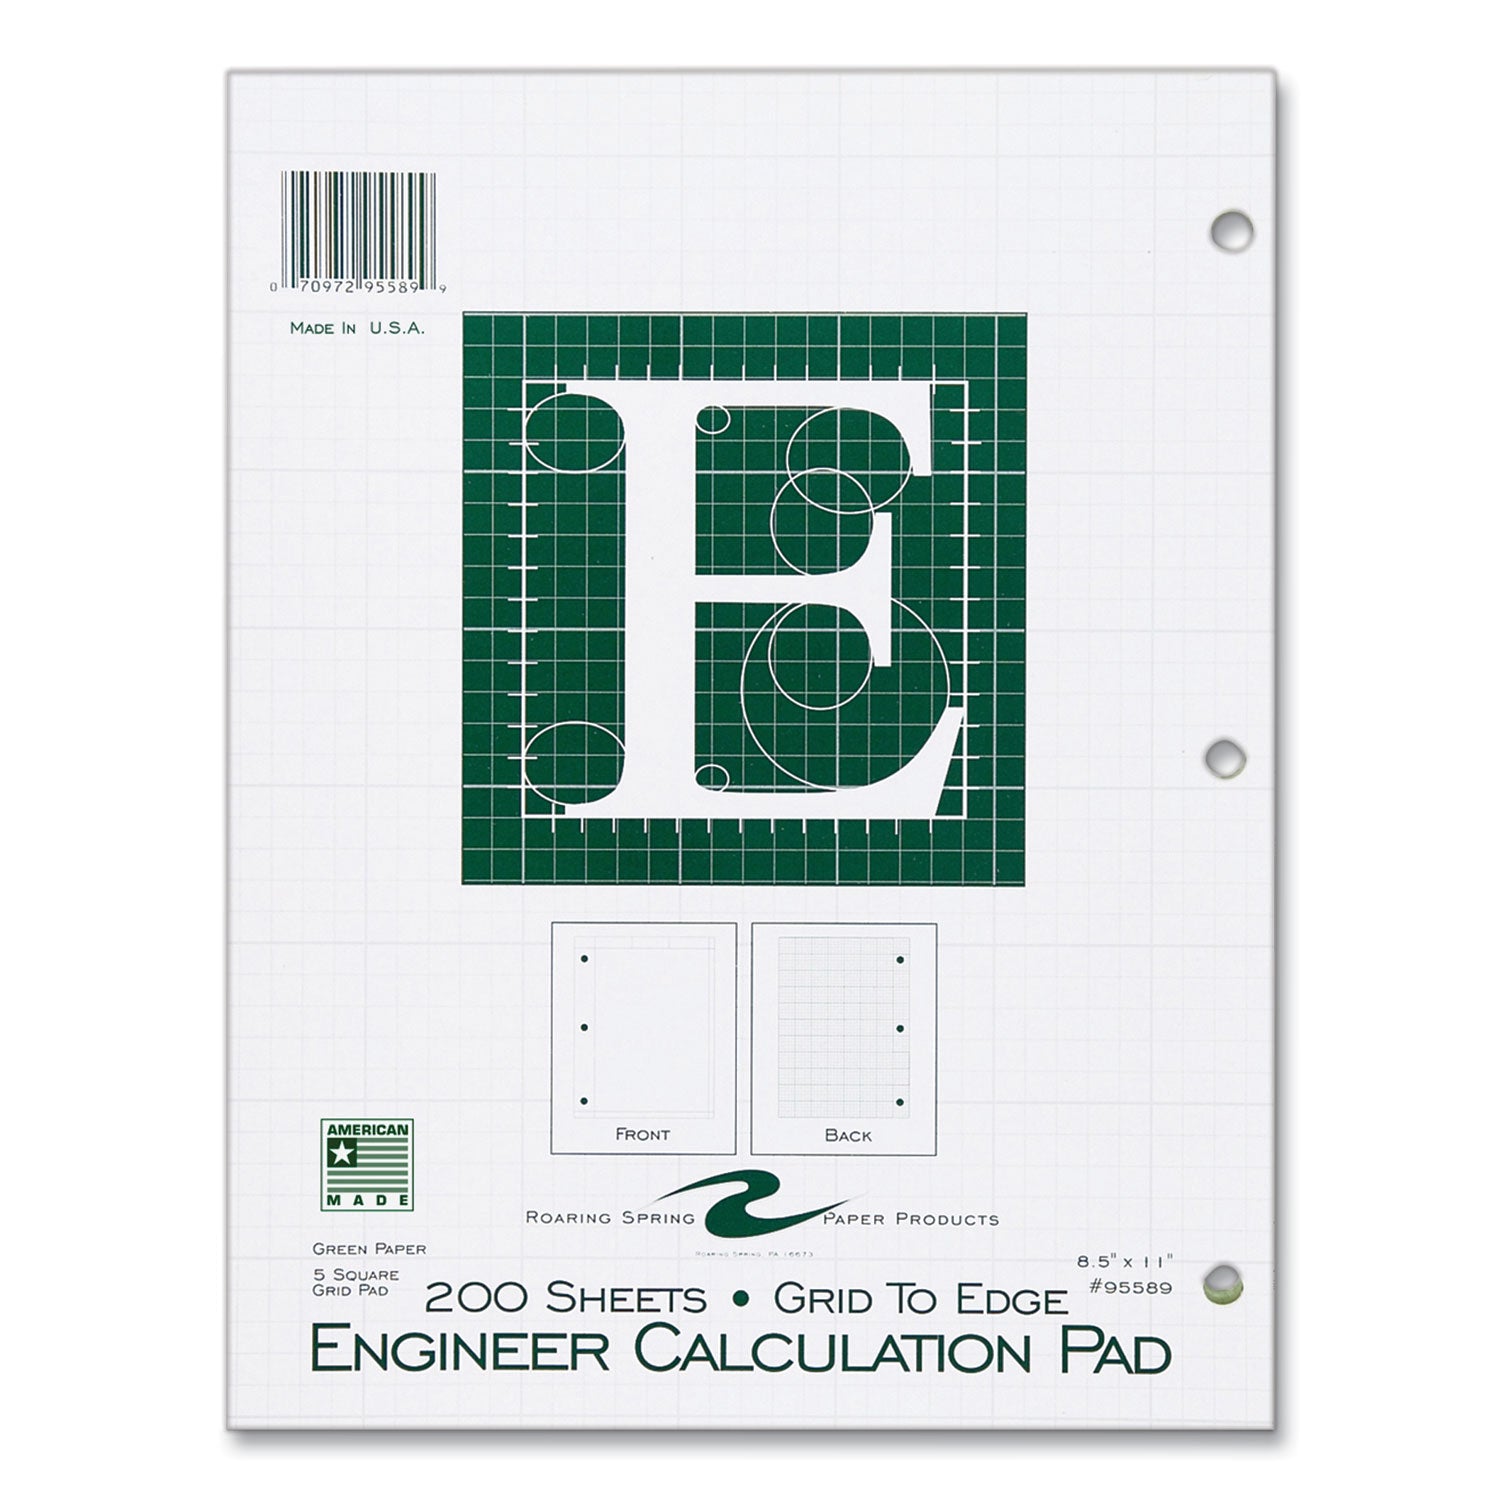 engineer-pad-125-margin-quad-rule-5-sq-in-1-sq-in-200-lt-green-85x11-sheets-pad-12-ct-ships-in-4-6-business-days_roa95589cs - 2